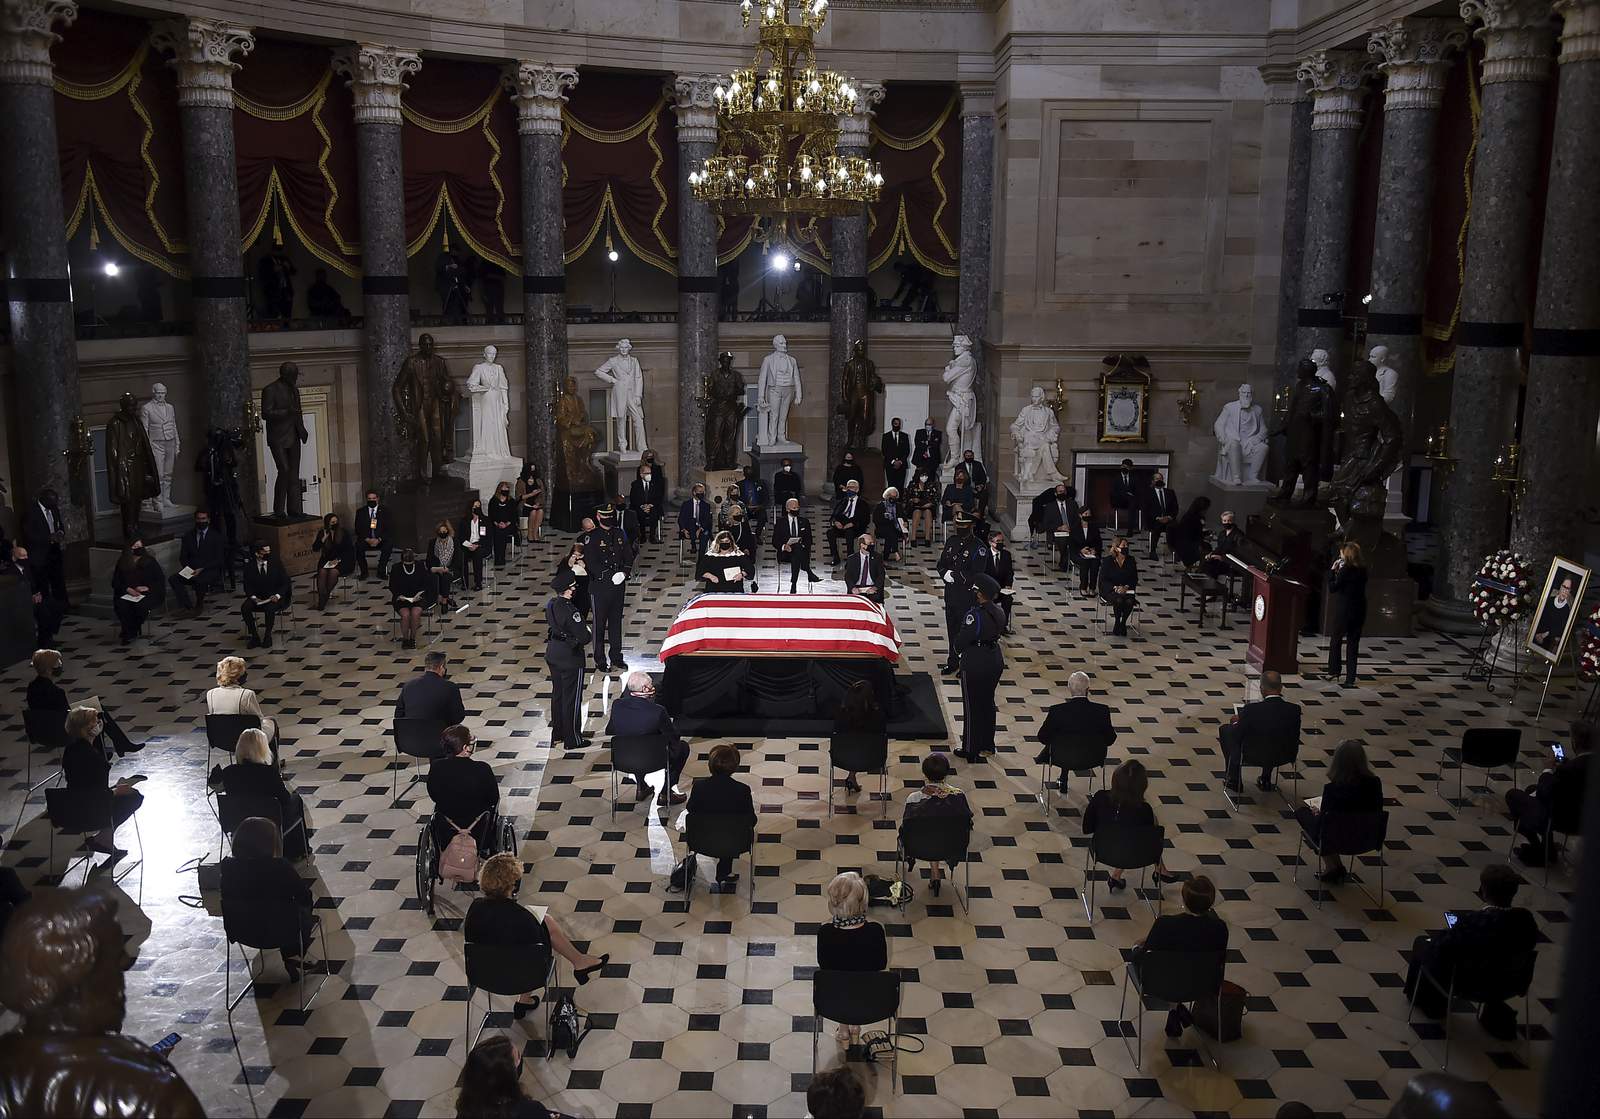 With ‘profound sorrow’: Ginsburg lies in state at US Capitol